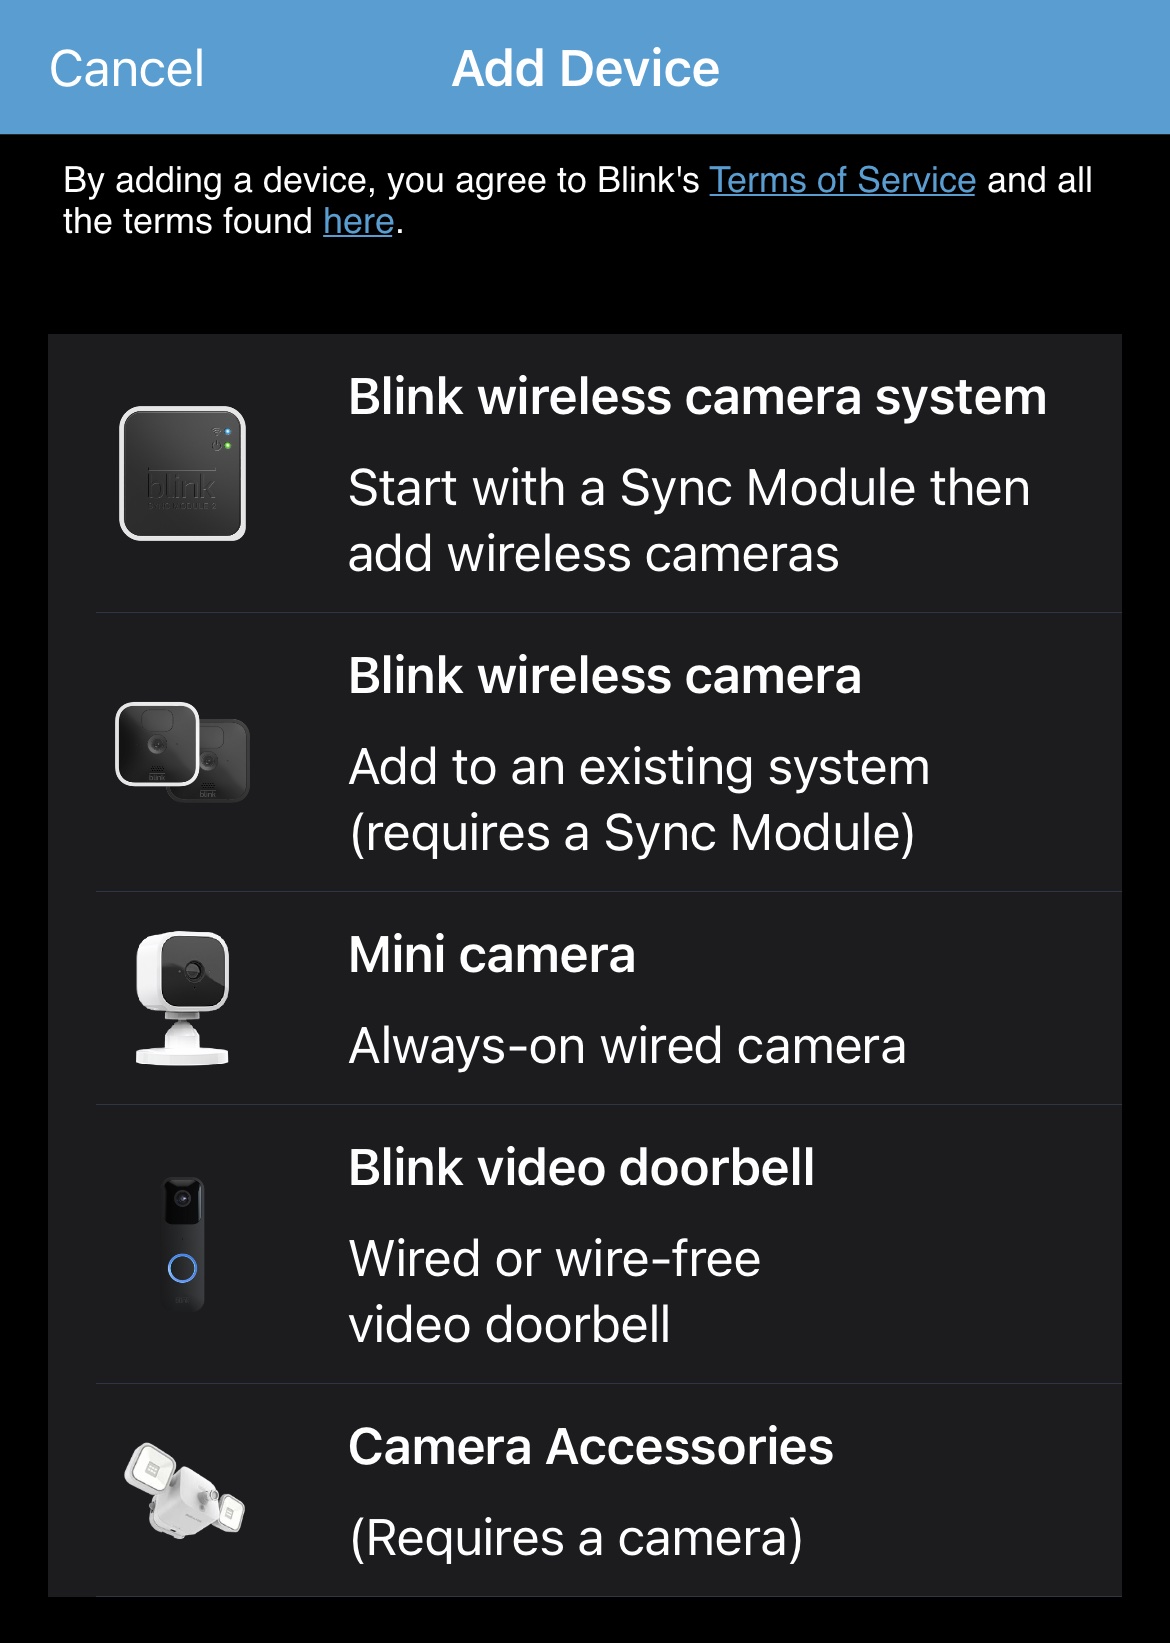 How to set up a Blink Outdoor Camera